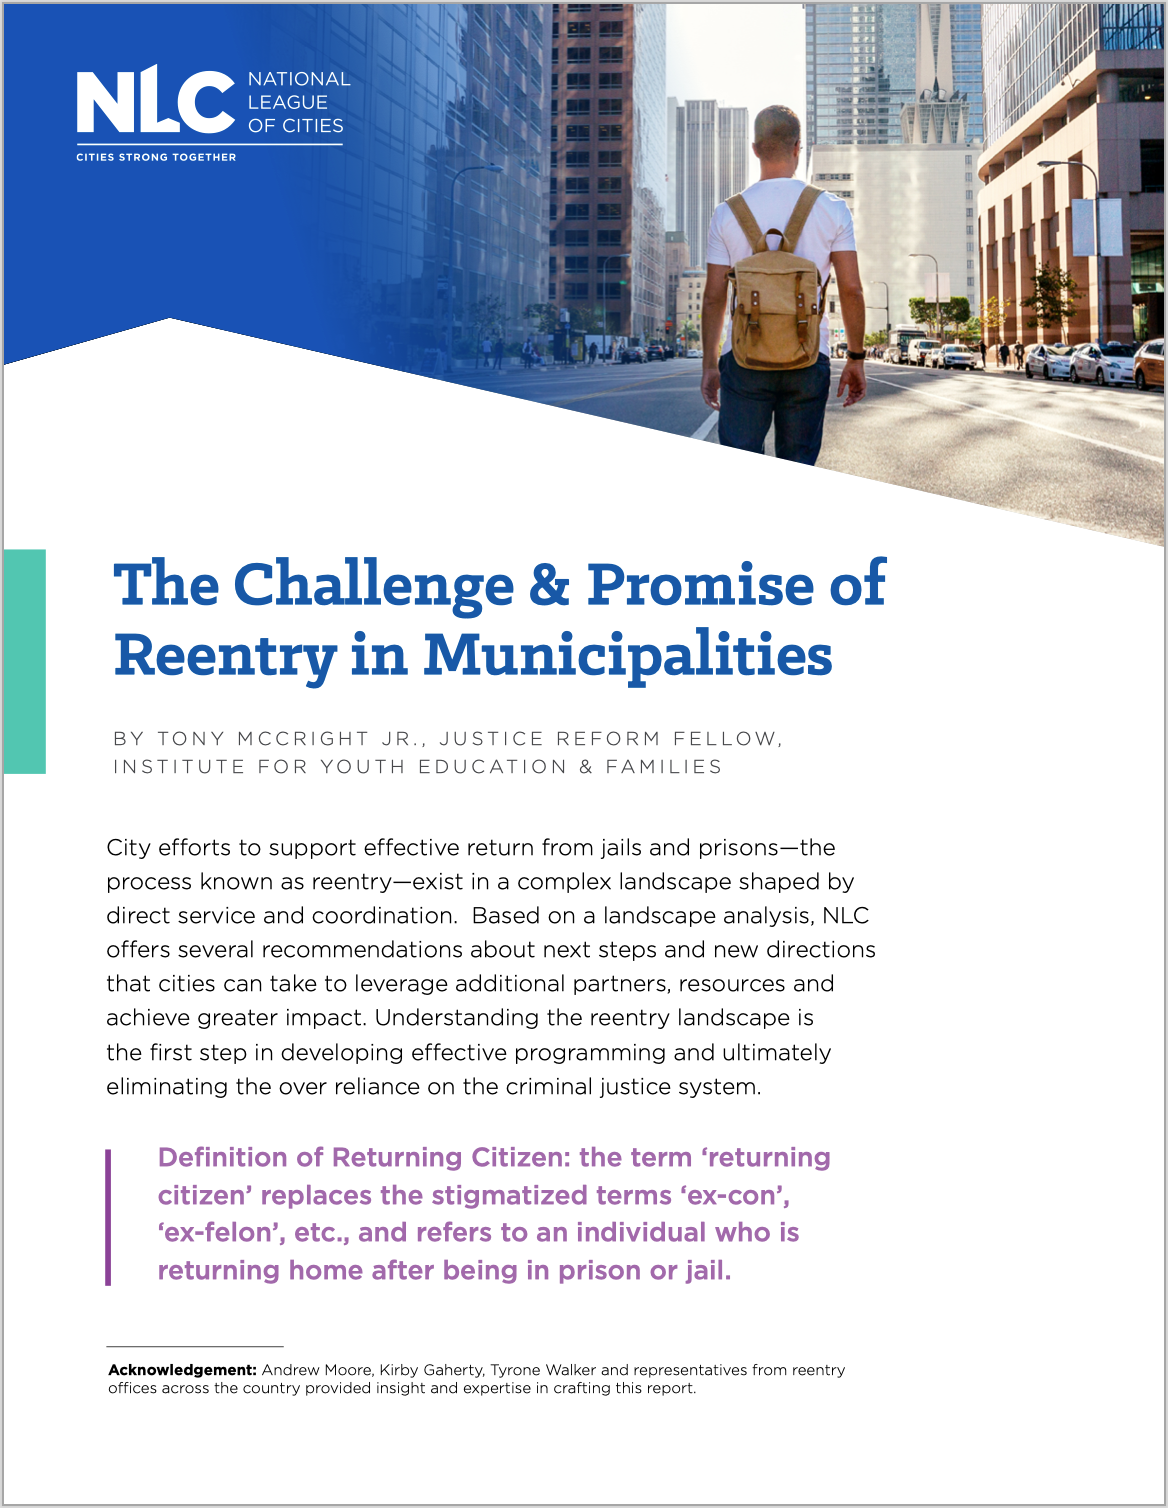 Reentry in Municipalities brief cover image